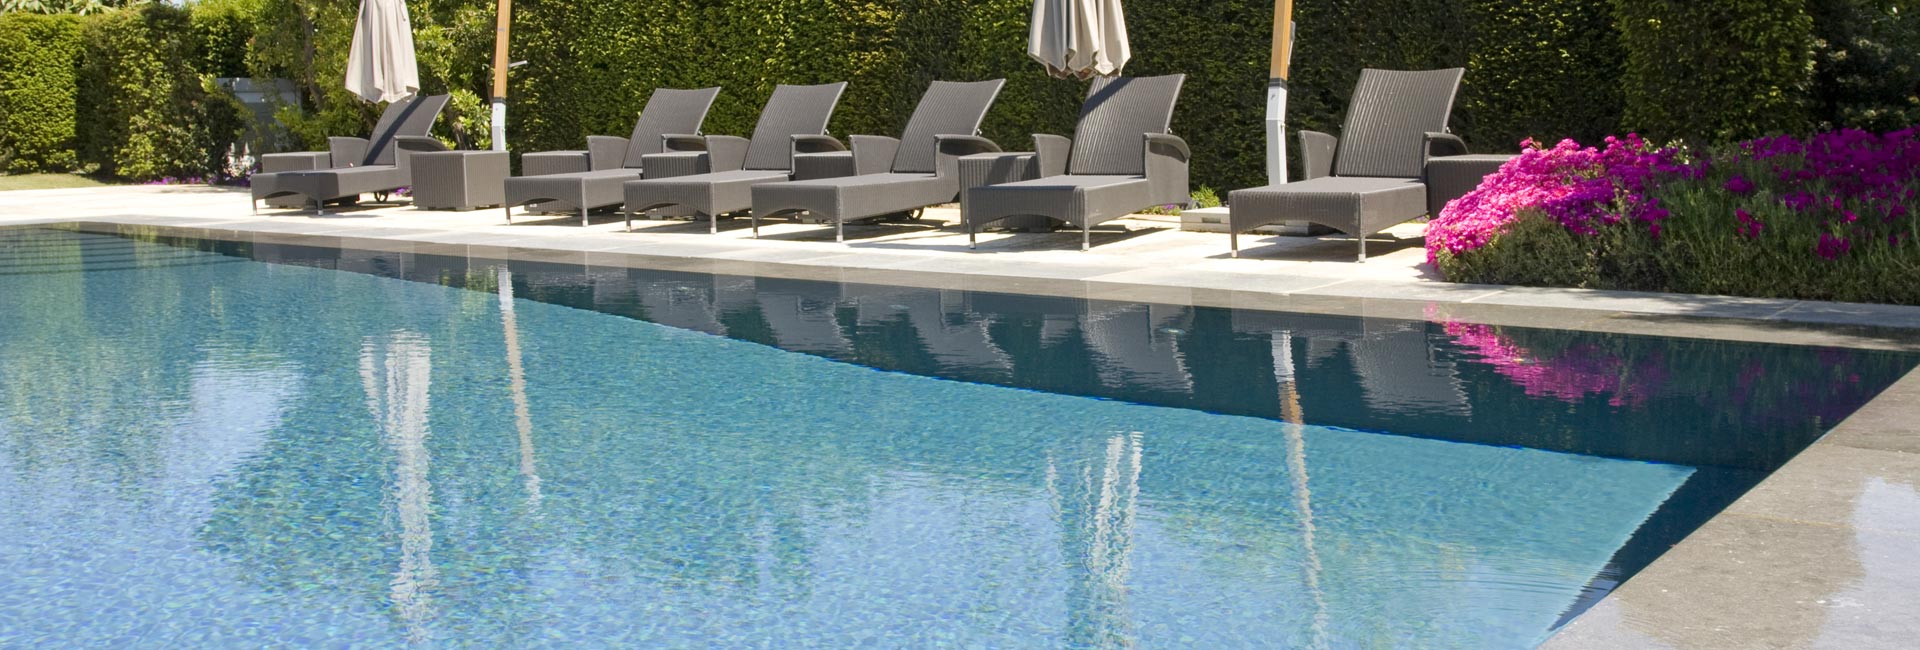 side view of swimming pool with lounge chairs